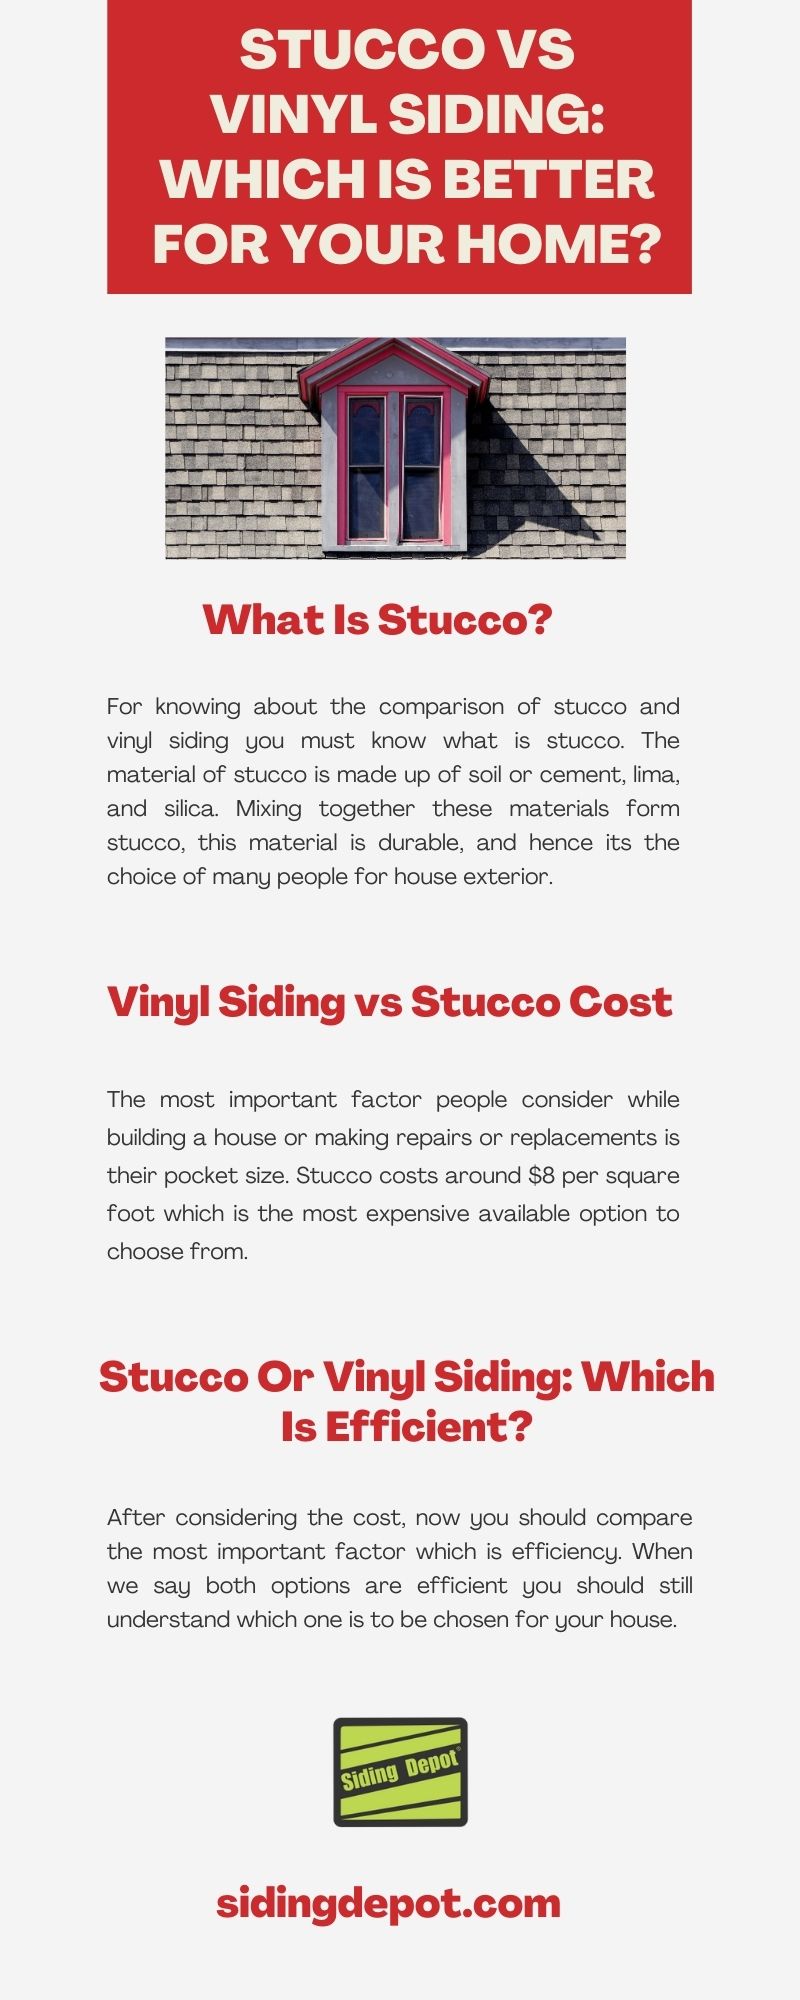 Stucco vs Vinyl Siding: Which is Better for Your Home?